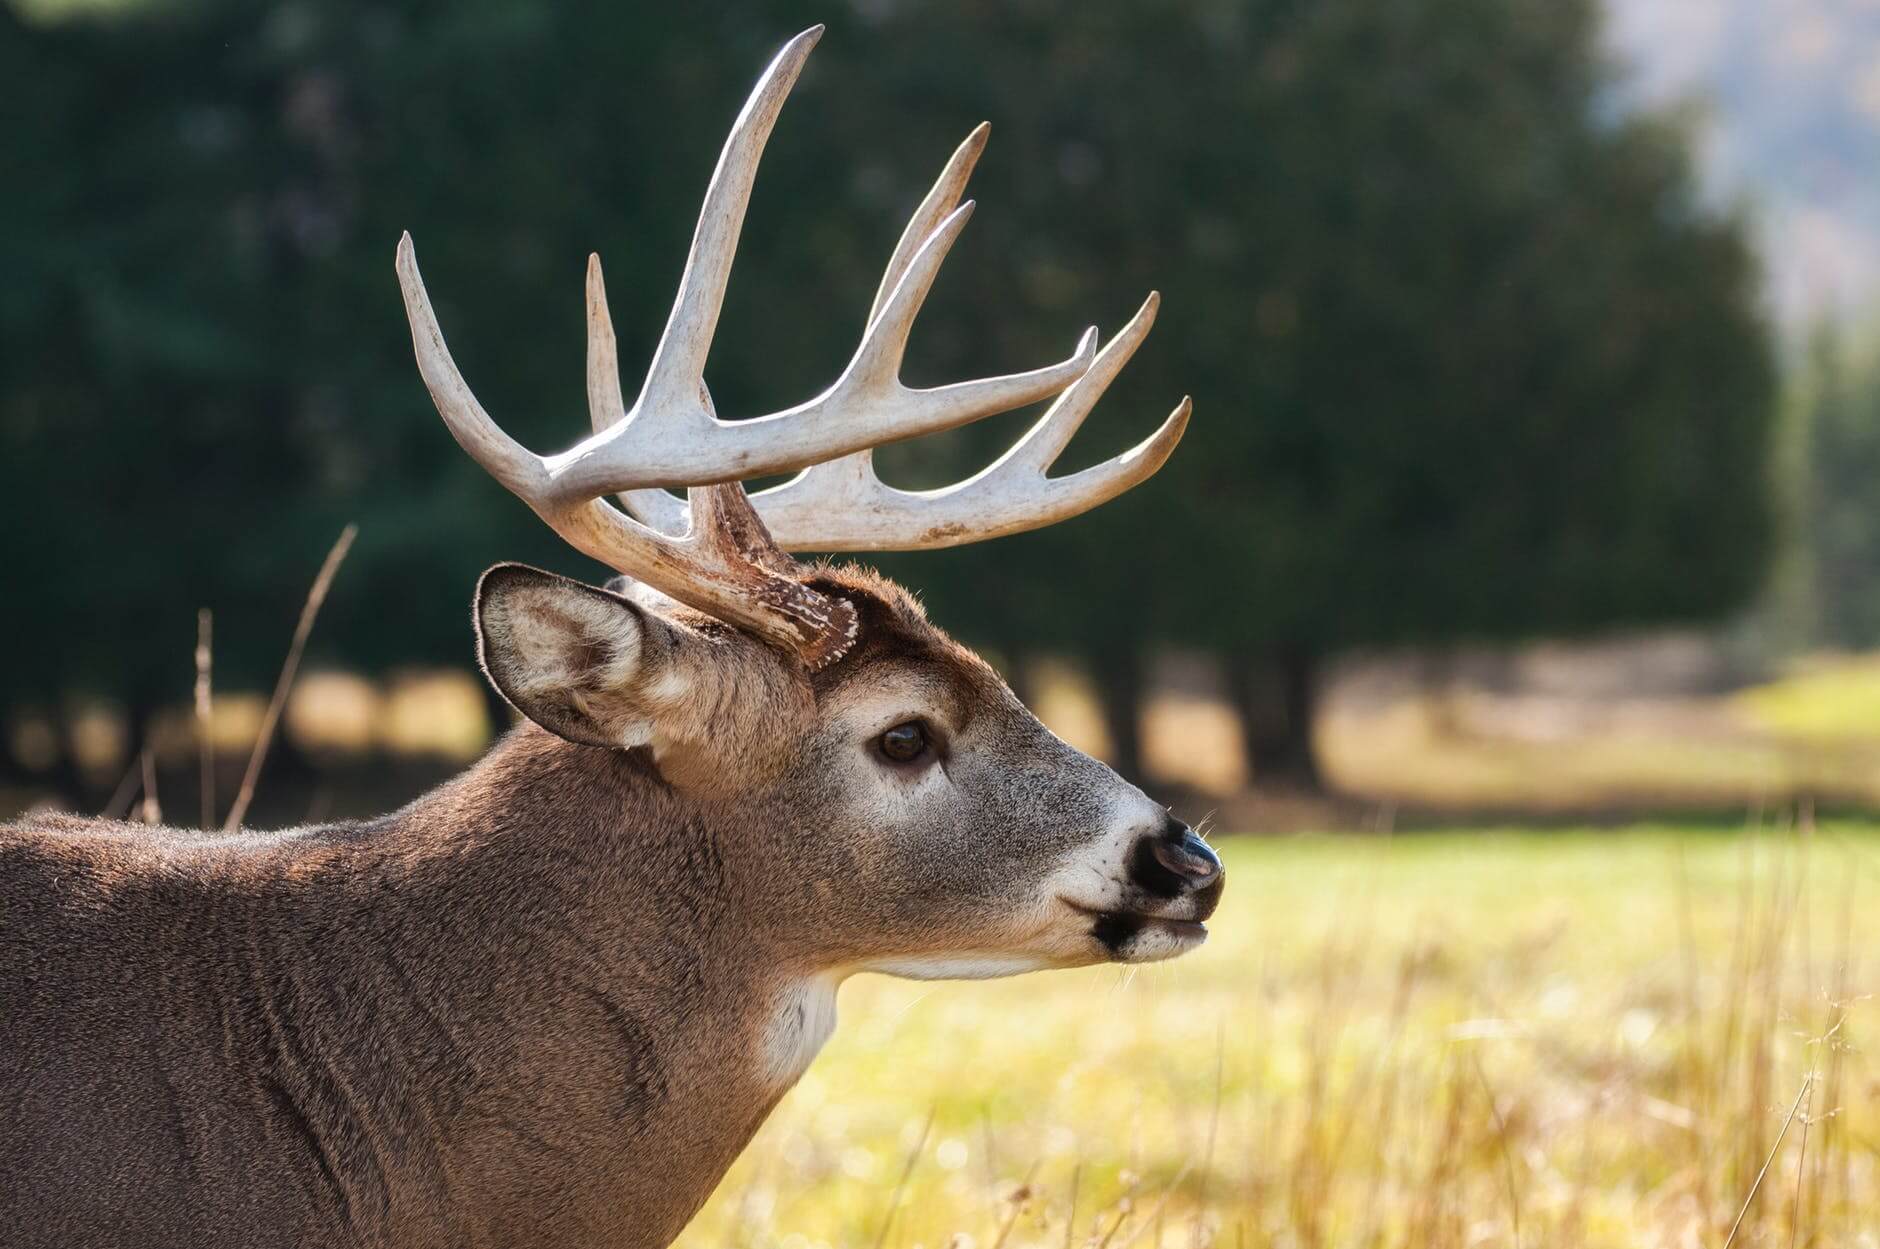 Additional case of Chronic Wasting Disease found in Benton County